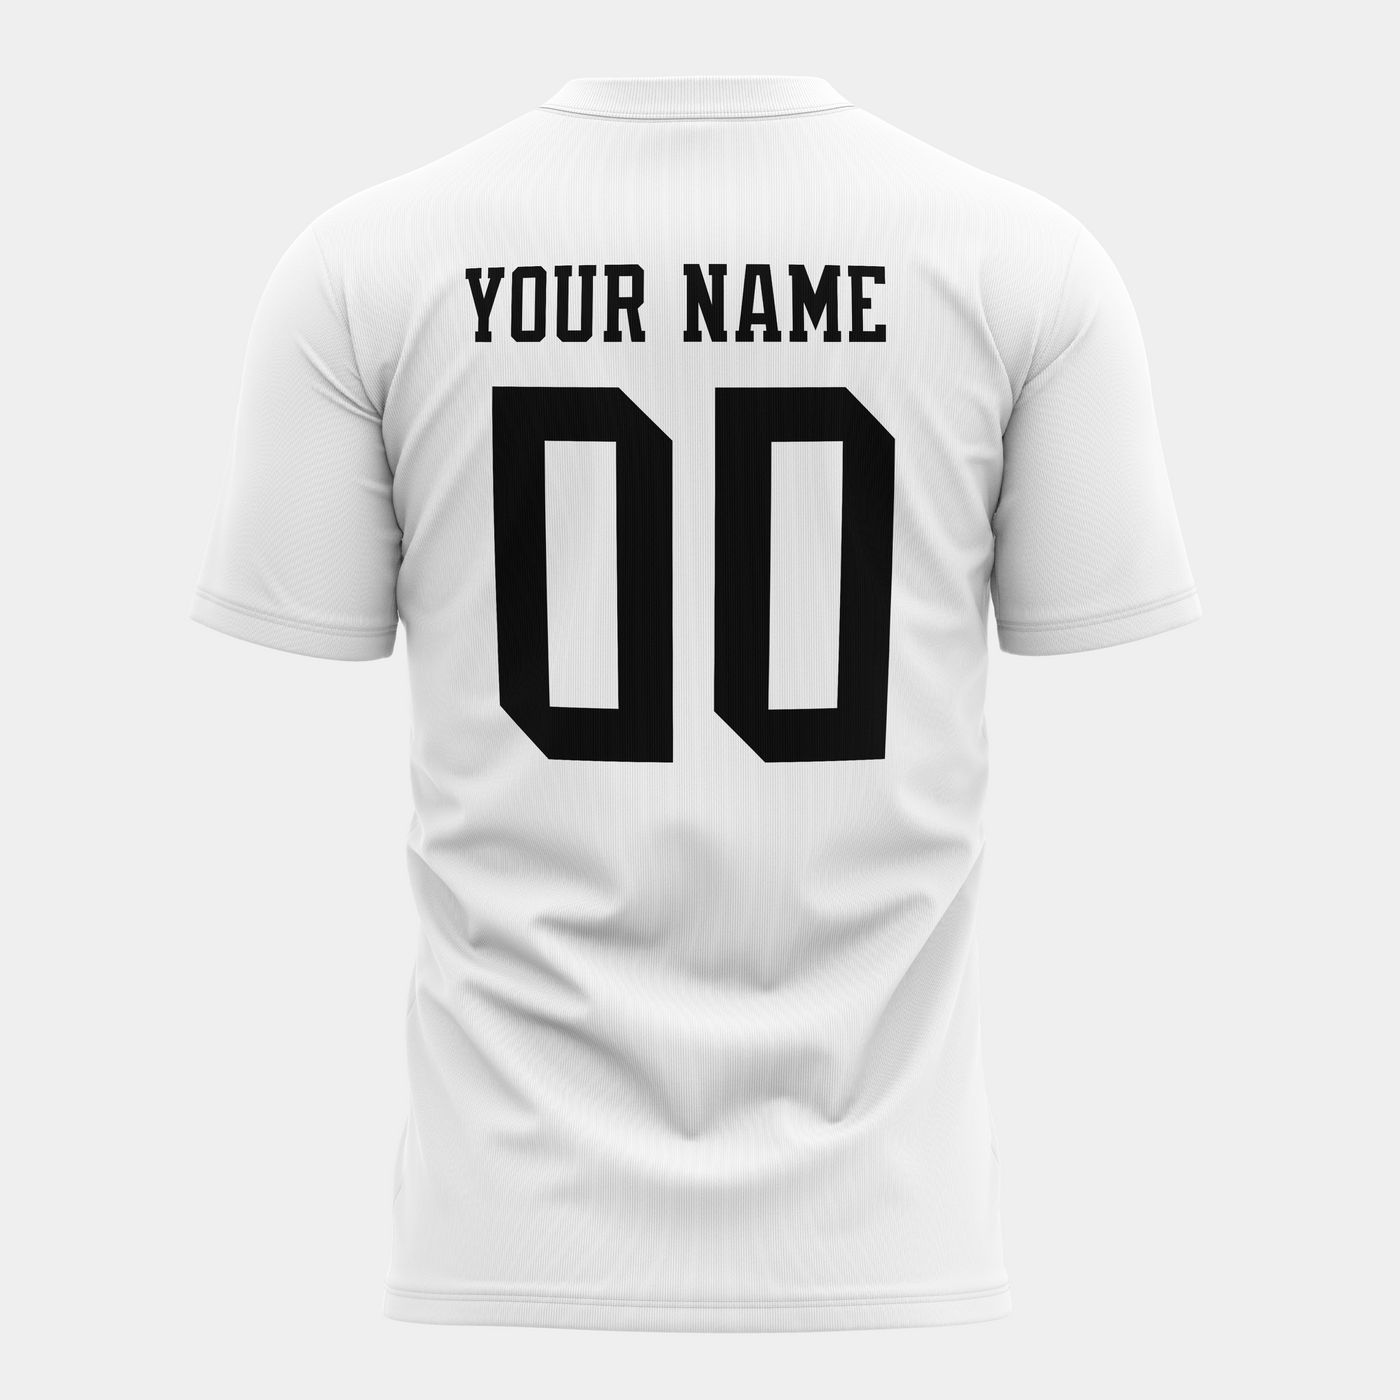 Maillot Merry FC - Blanc